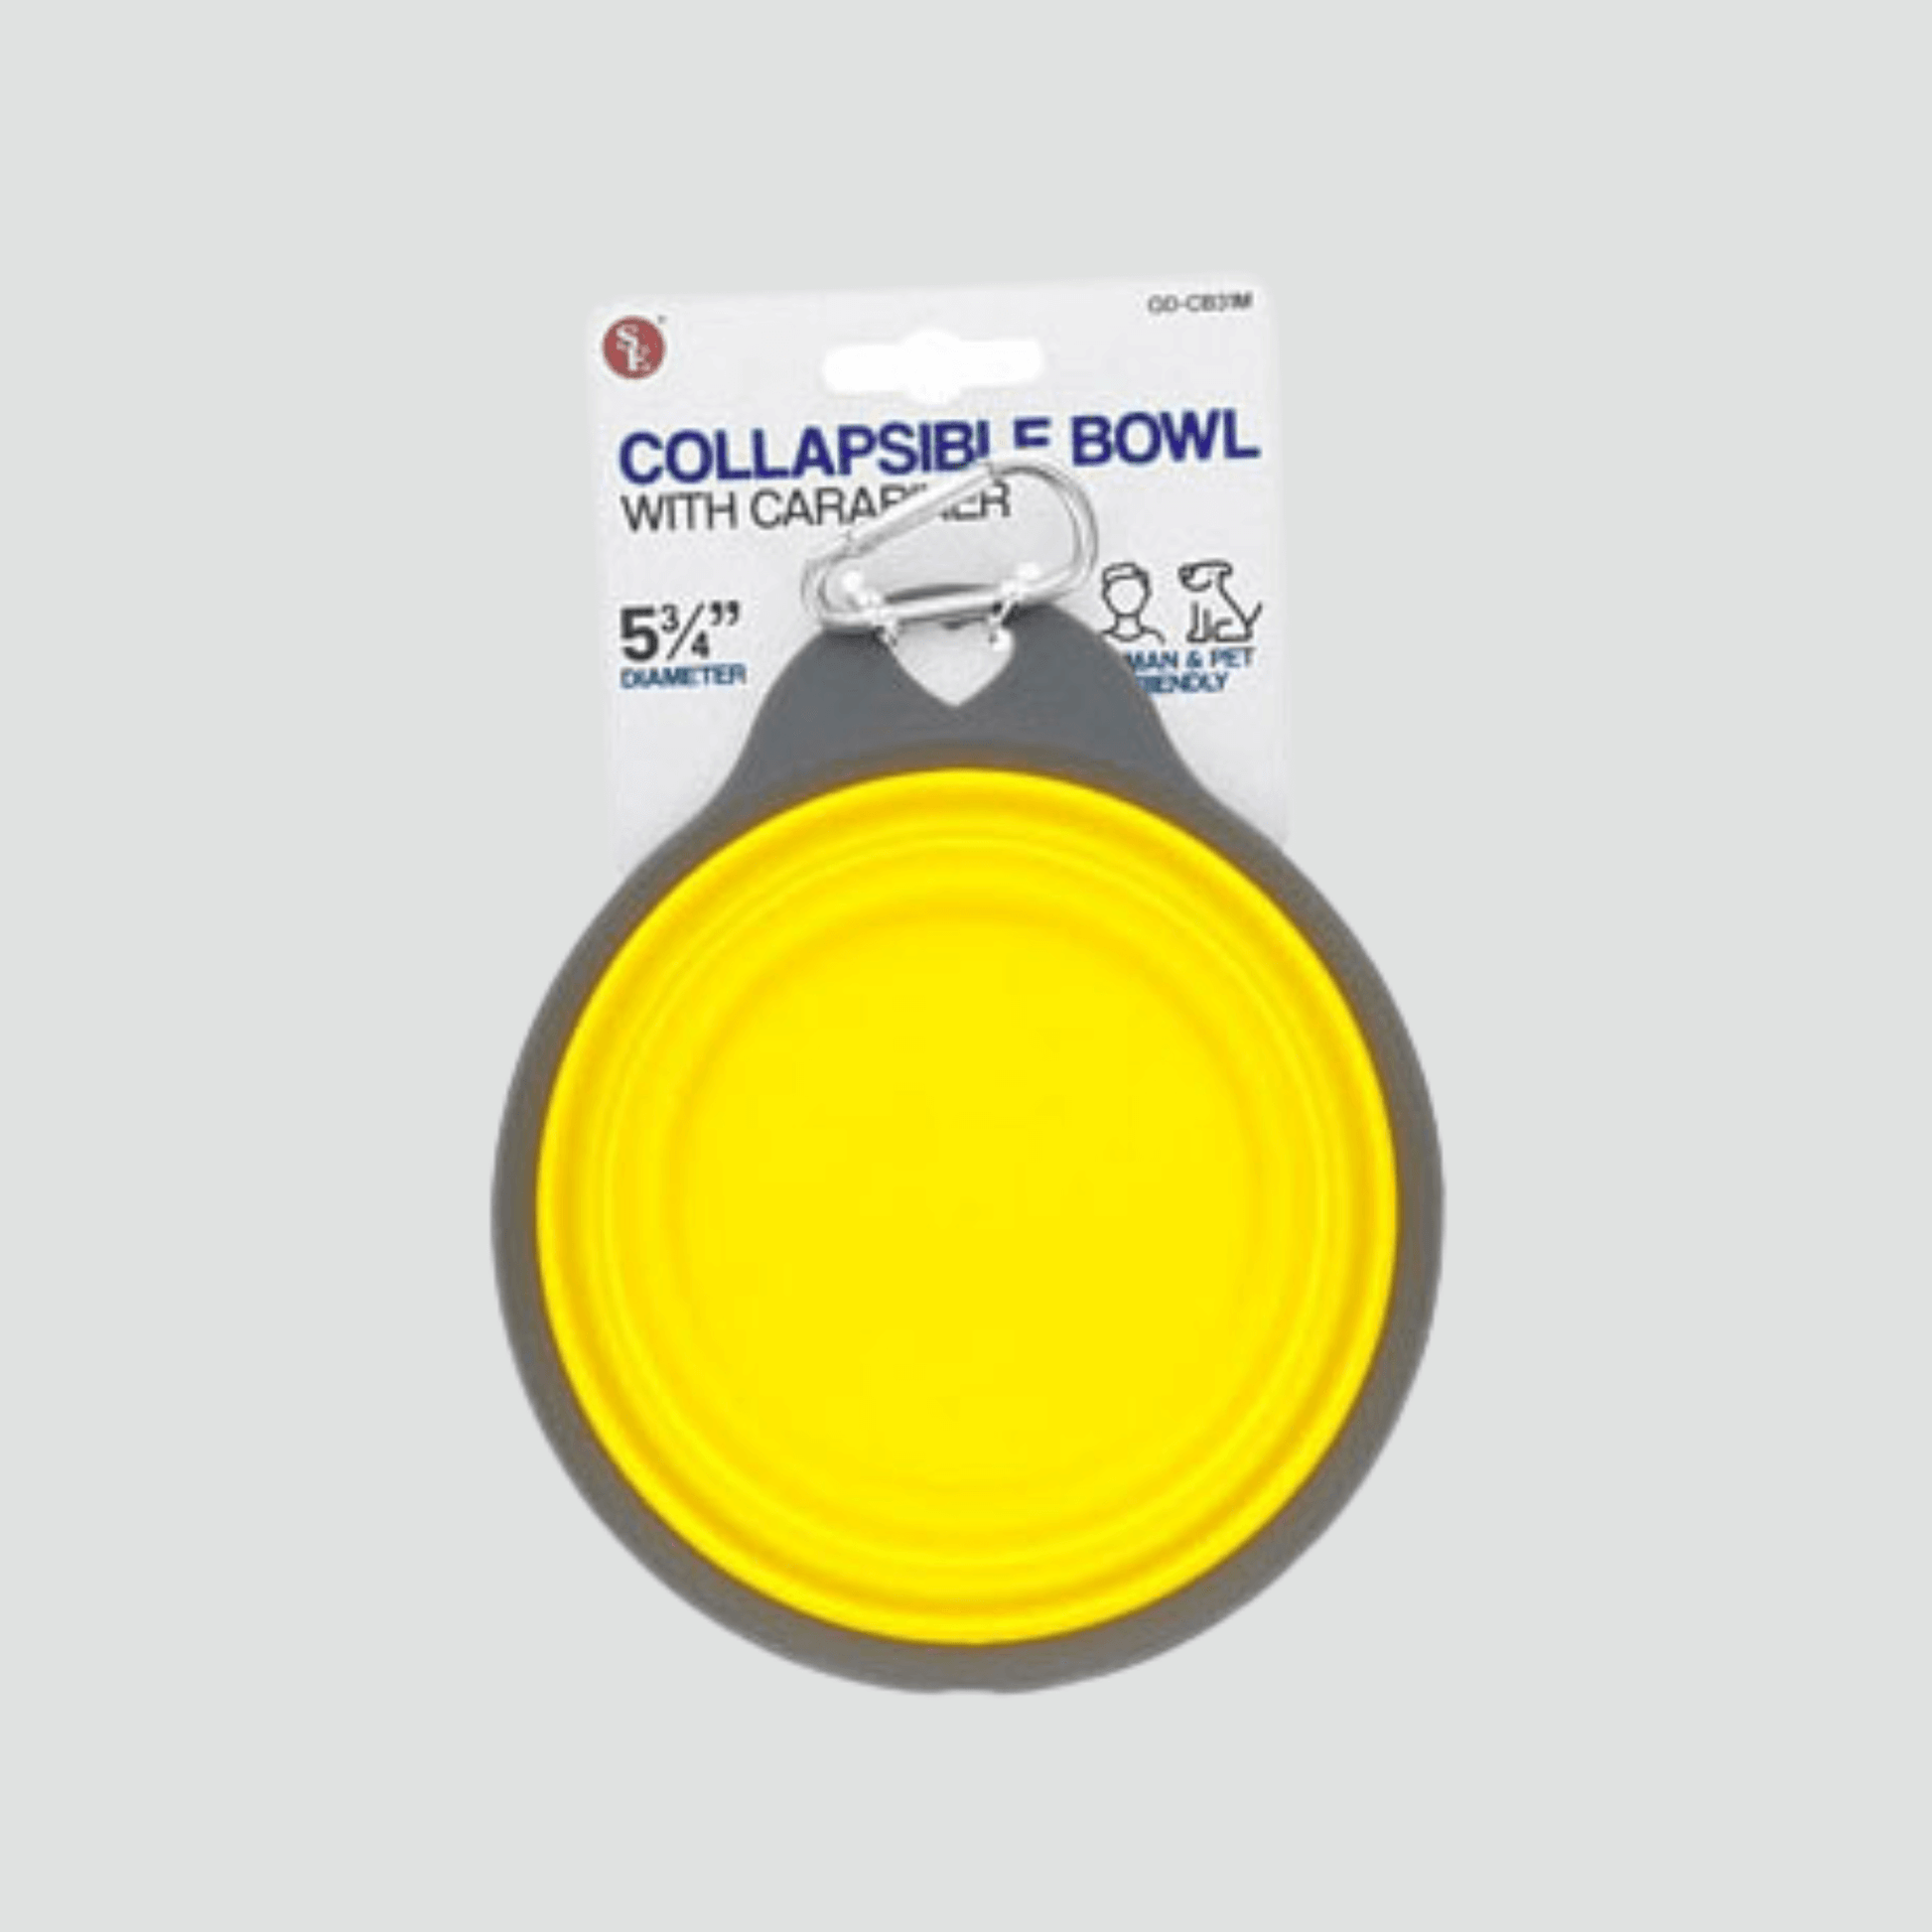 Collapsible Bowl with Carabiner